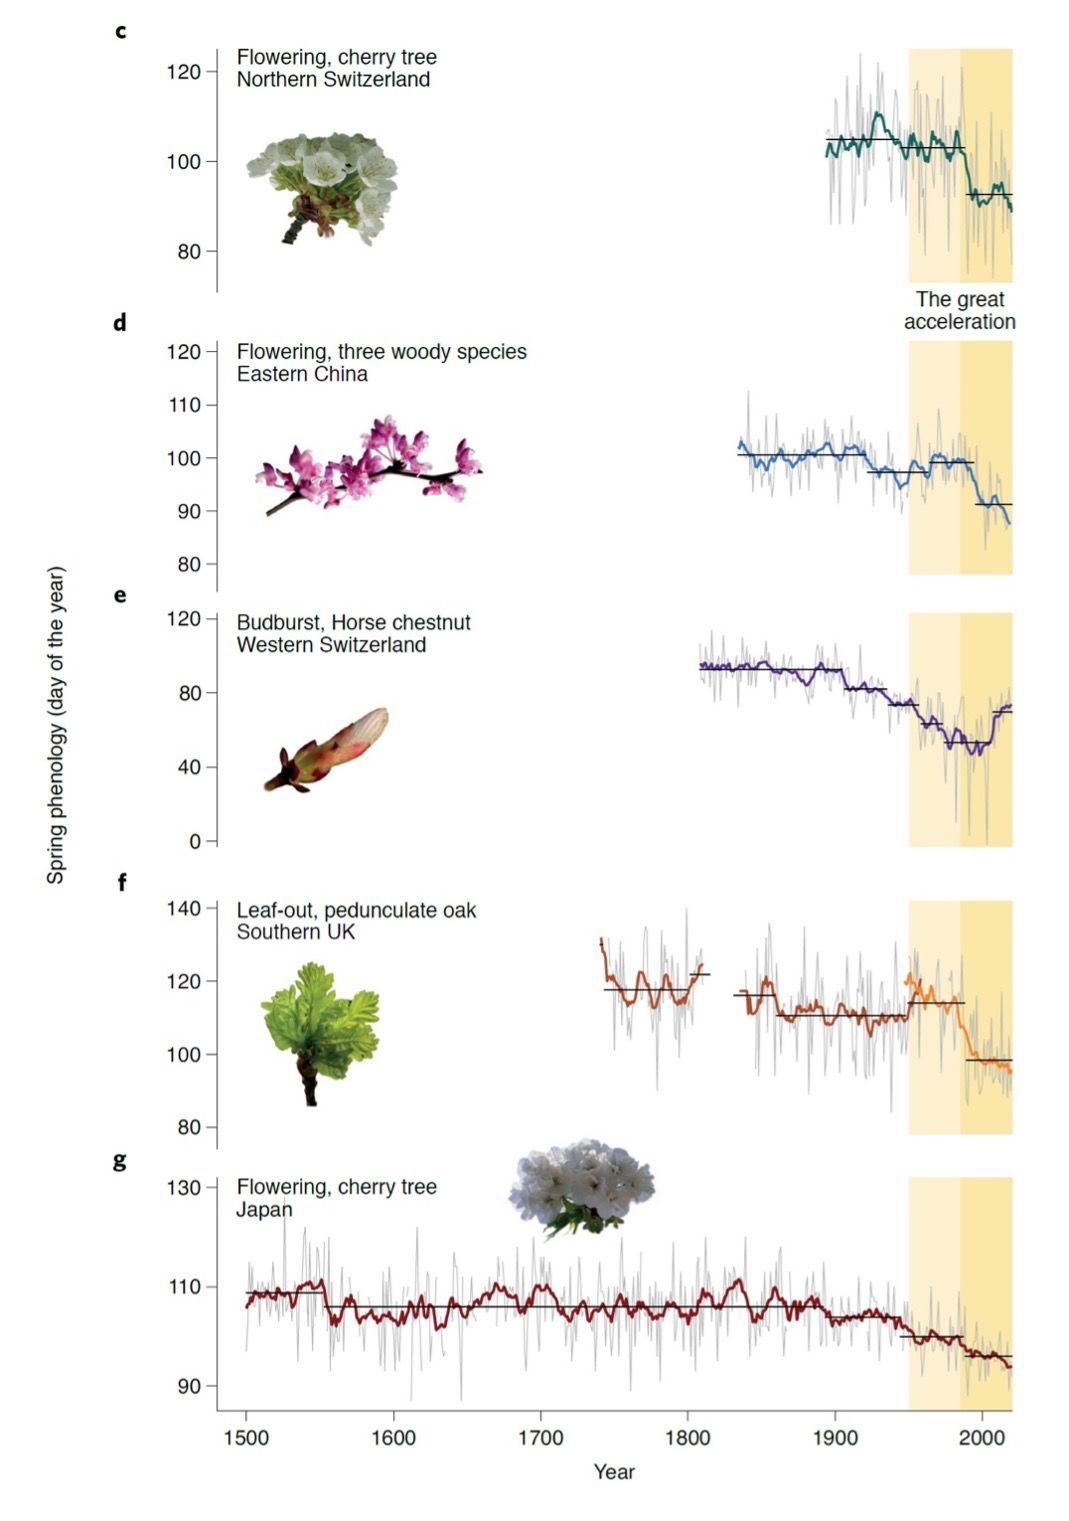 The five time series: c) Bloom onset of wild cherry trees in Liestal, BL (1894-2020), d) Bloom onset of three woody species in China (1834-2020), e) Leaf emergence data of a horse chestnut in Geneva (1808-2020), f) Leaf emergence of pedunculate oak in Great Britain of the Marsham family (dark orange; 1736-1958) and J. Combes (light orange; 1950-2020), g) Bloom onset of Yamazakura cherry trees in Kyoto, Japan (1500-2020). The left axis shows the day of the year when the tree buds burst or bloom. The grey thin lines represent interannual variability, thick lines are 10-year moving averages. Figure: Yann Vitasse (WSL)